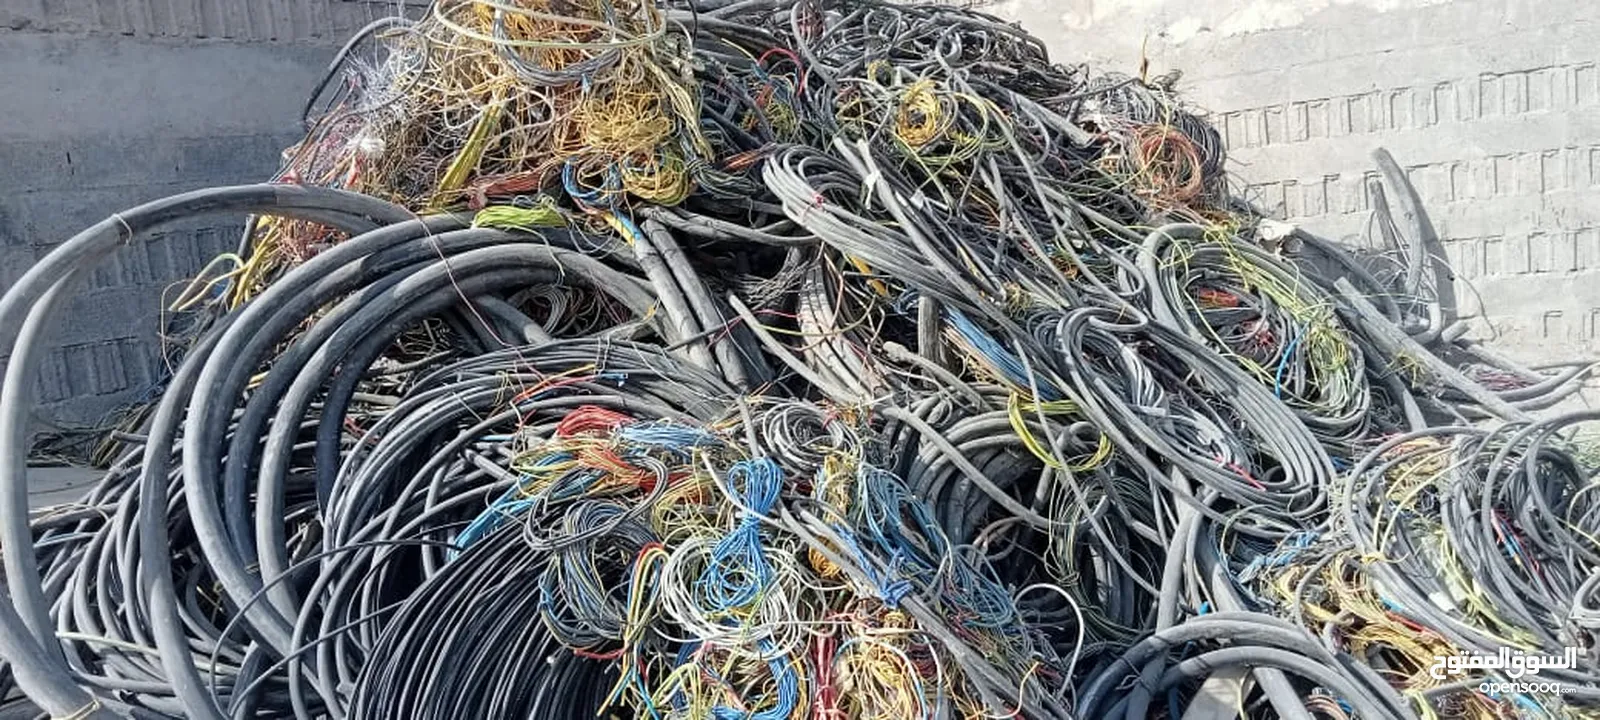 Buy cables And more items